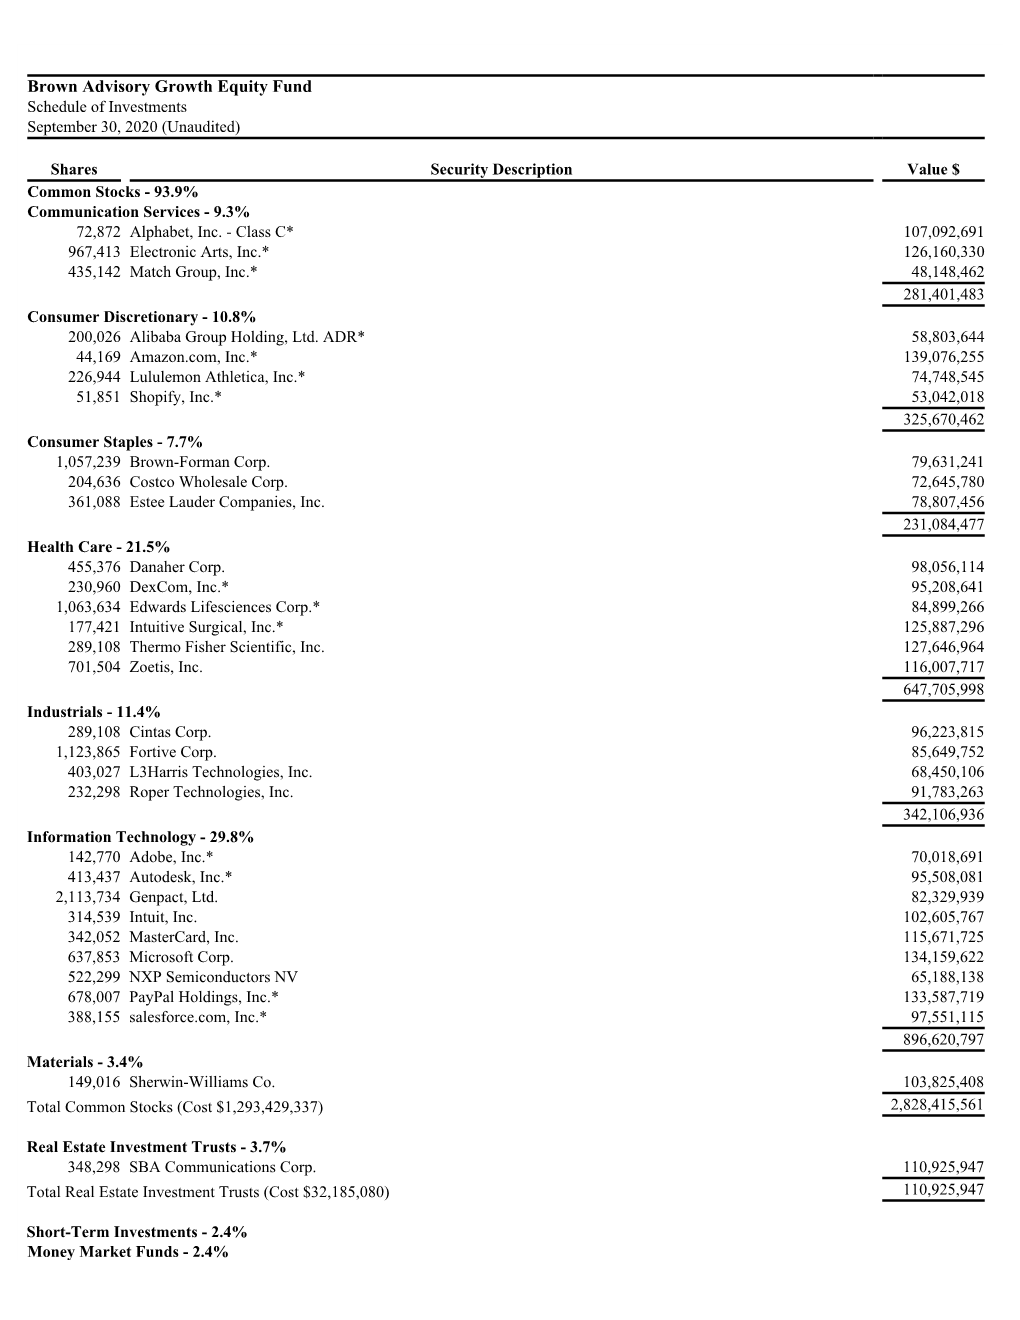 Brown Advisory Growth Equity Fund Schedule of Investments September 30, 2020 (Unaudited)